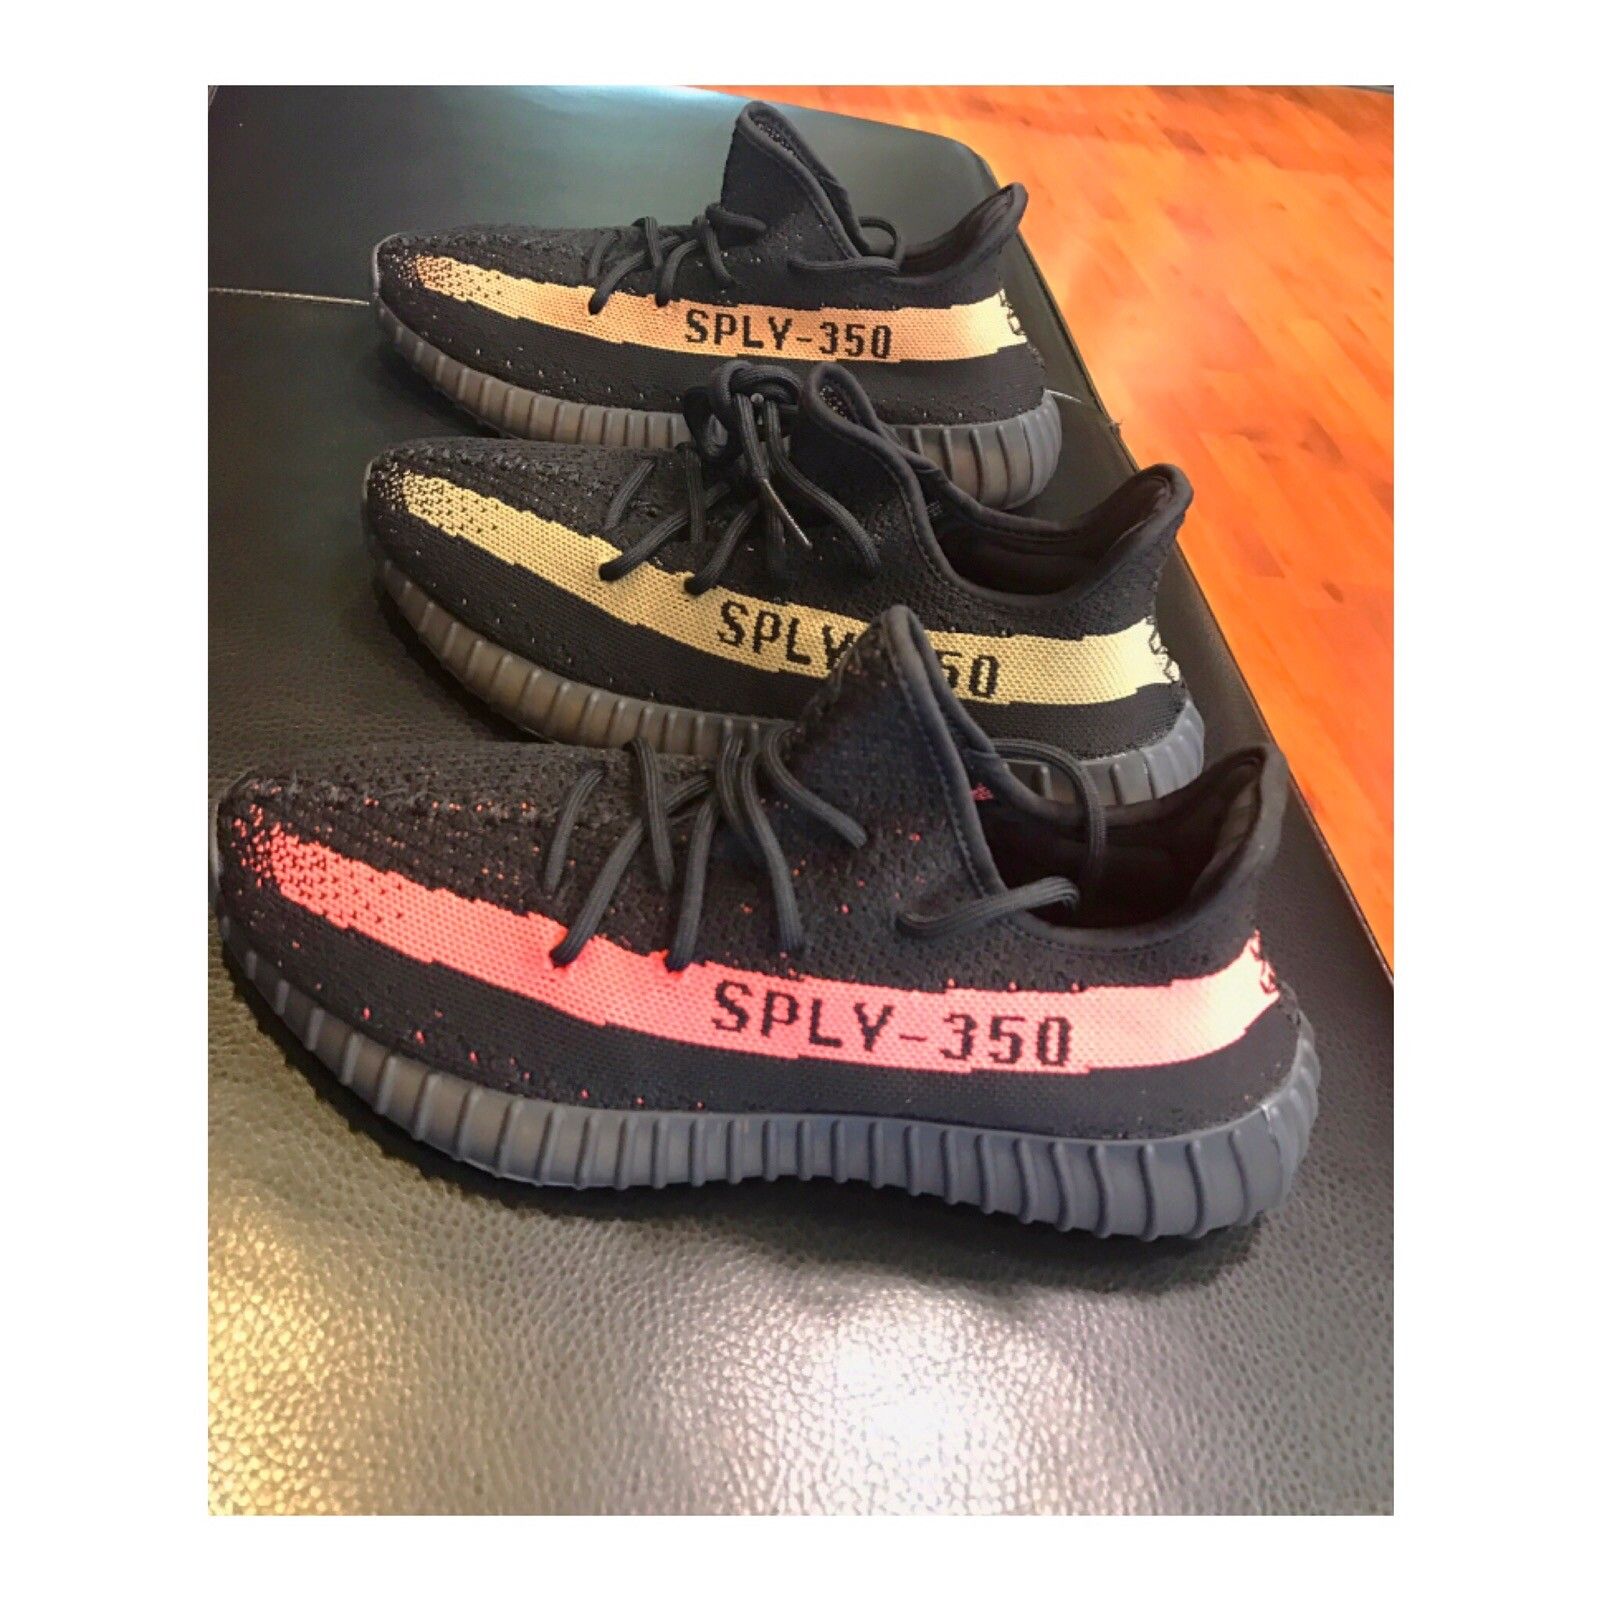 Adidas Yeezy Boost 350 v 2 Size US 9 / EU 42 - 1 Preview